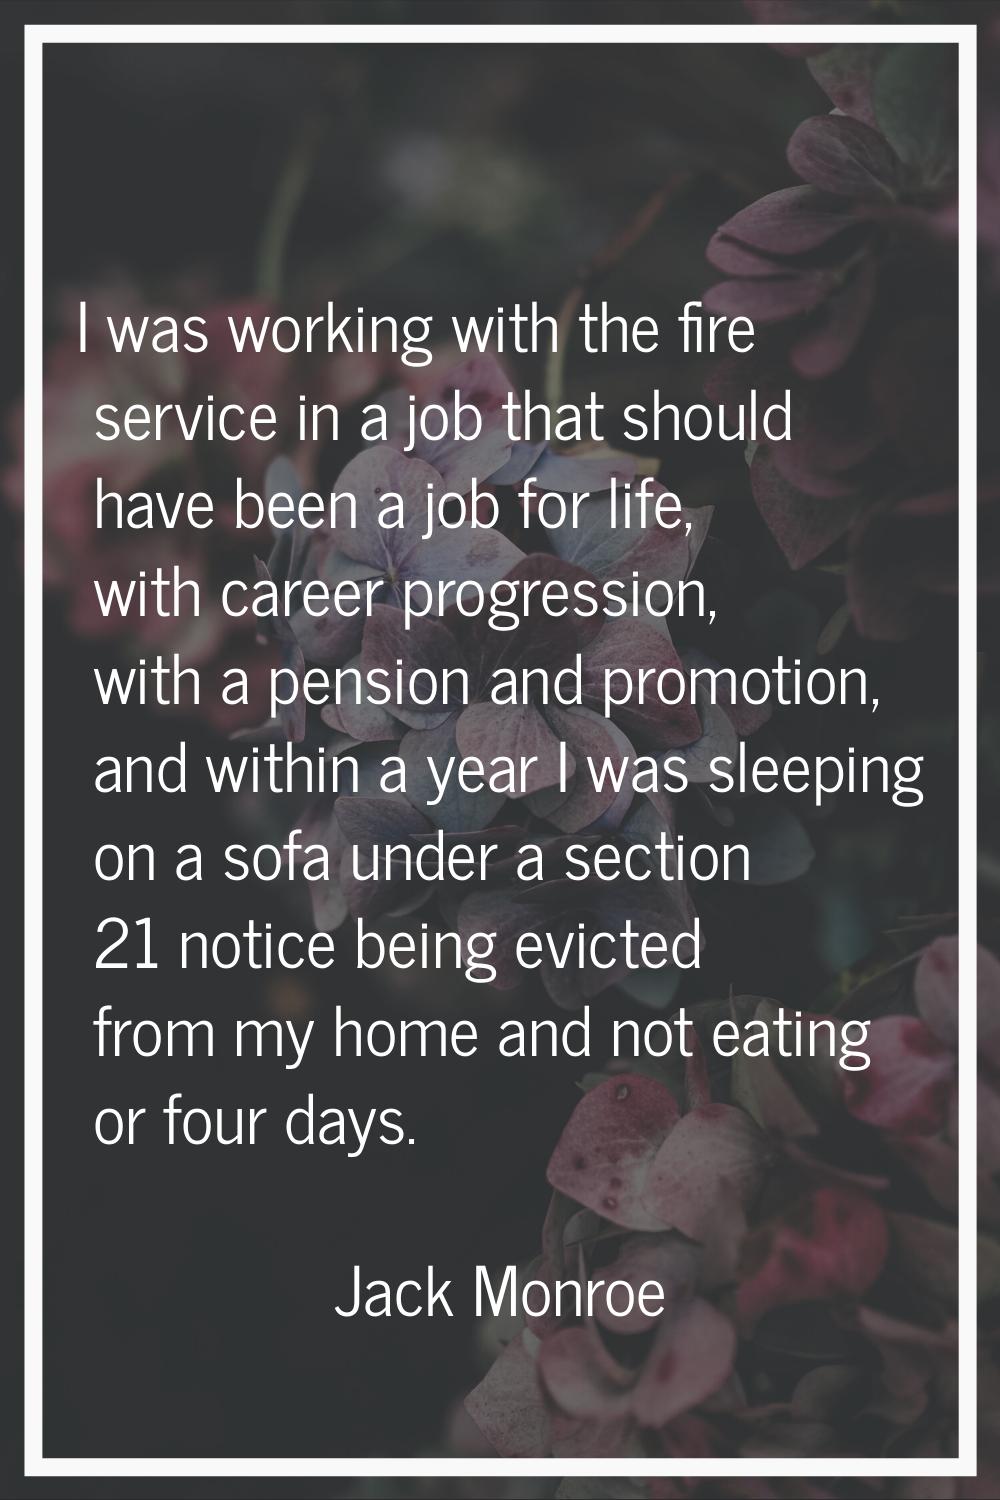 I was working with the fire service in a job that should have been a job for life, with career prog